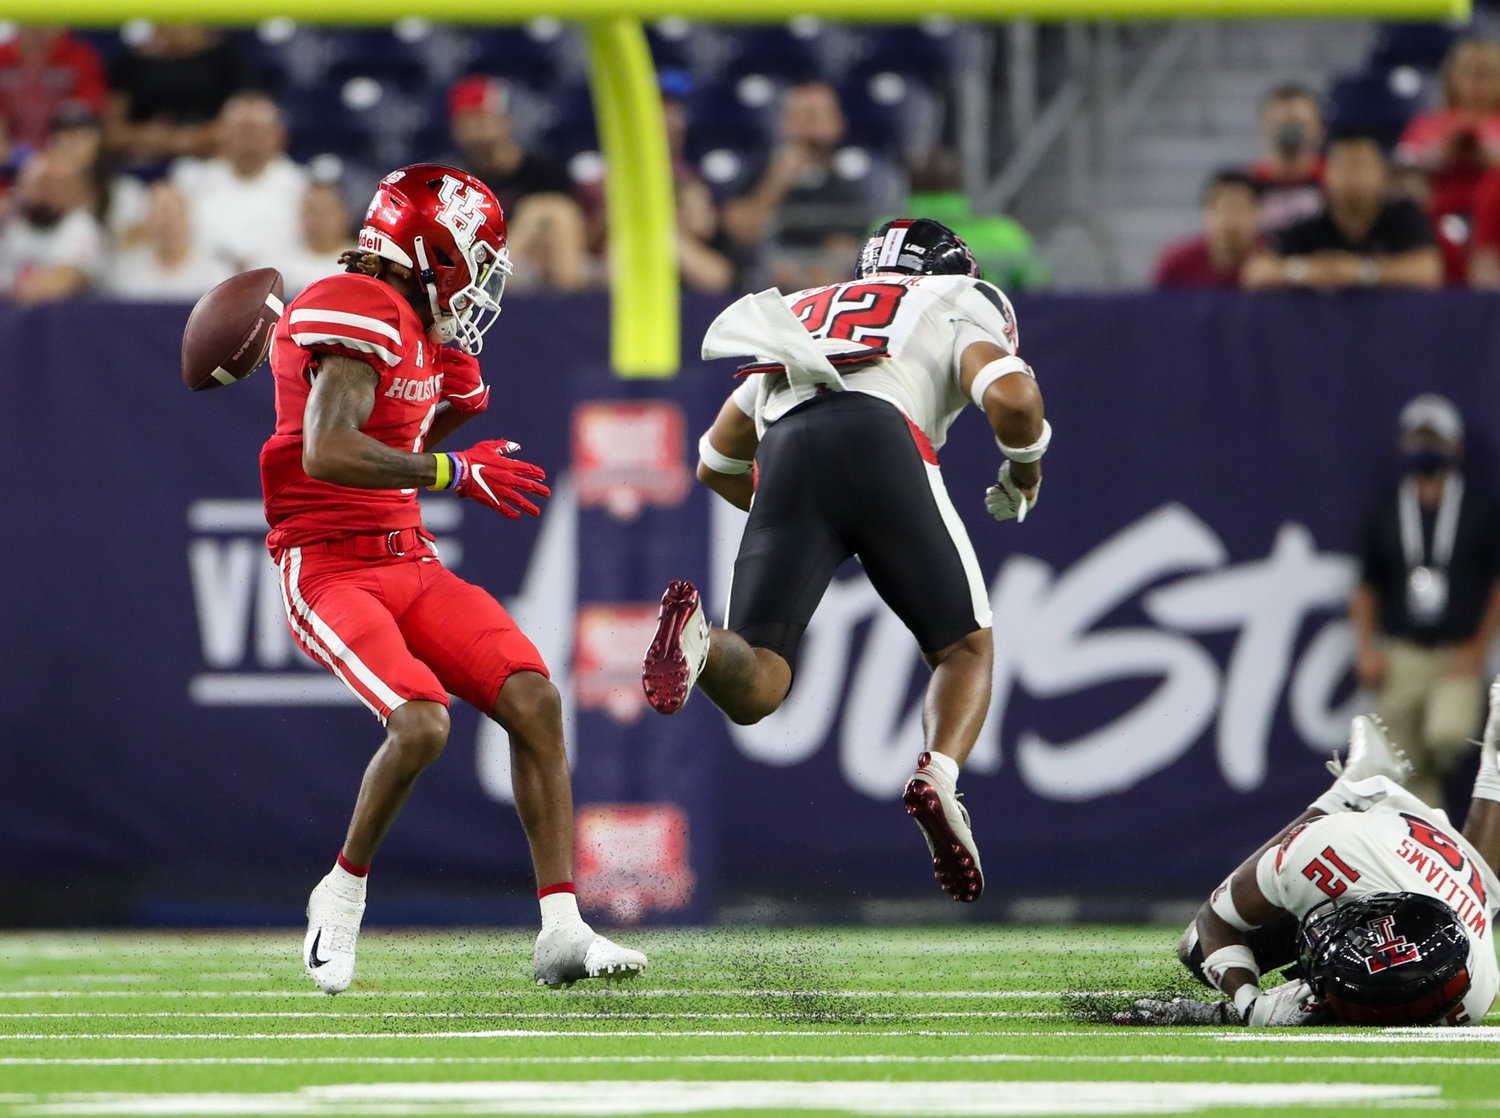 Texas Tech Red Raiders defensive back Reggie Pearson Jr. (22) causes a fumble with a hit on Houston Cougars wide receiver Nathaniel Dell (1) during an NCAA football game between Houston and Texas Tech on September 4, 2021 in Houston, Texas.